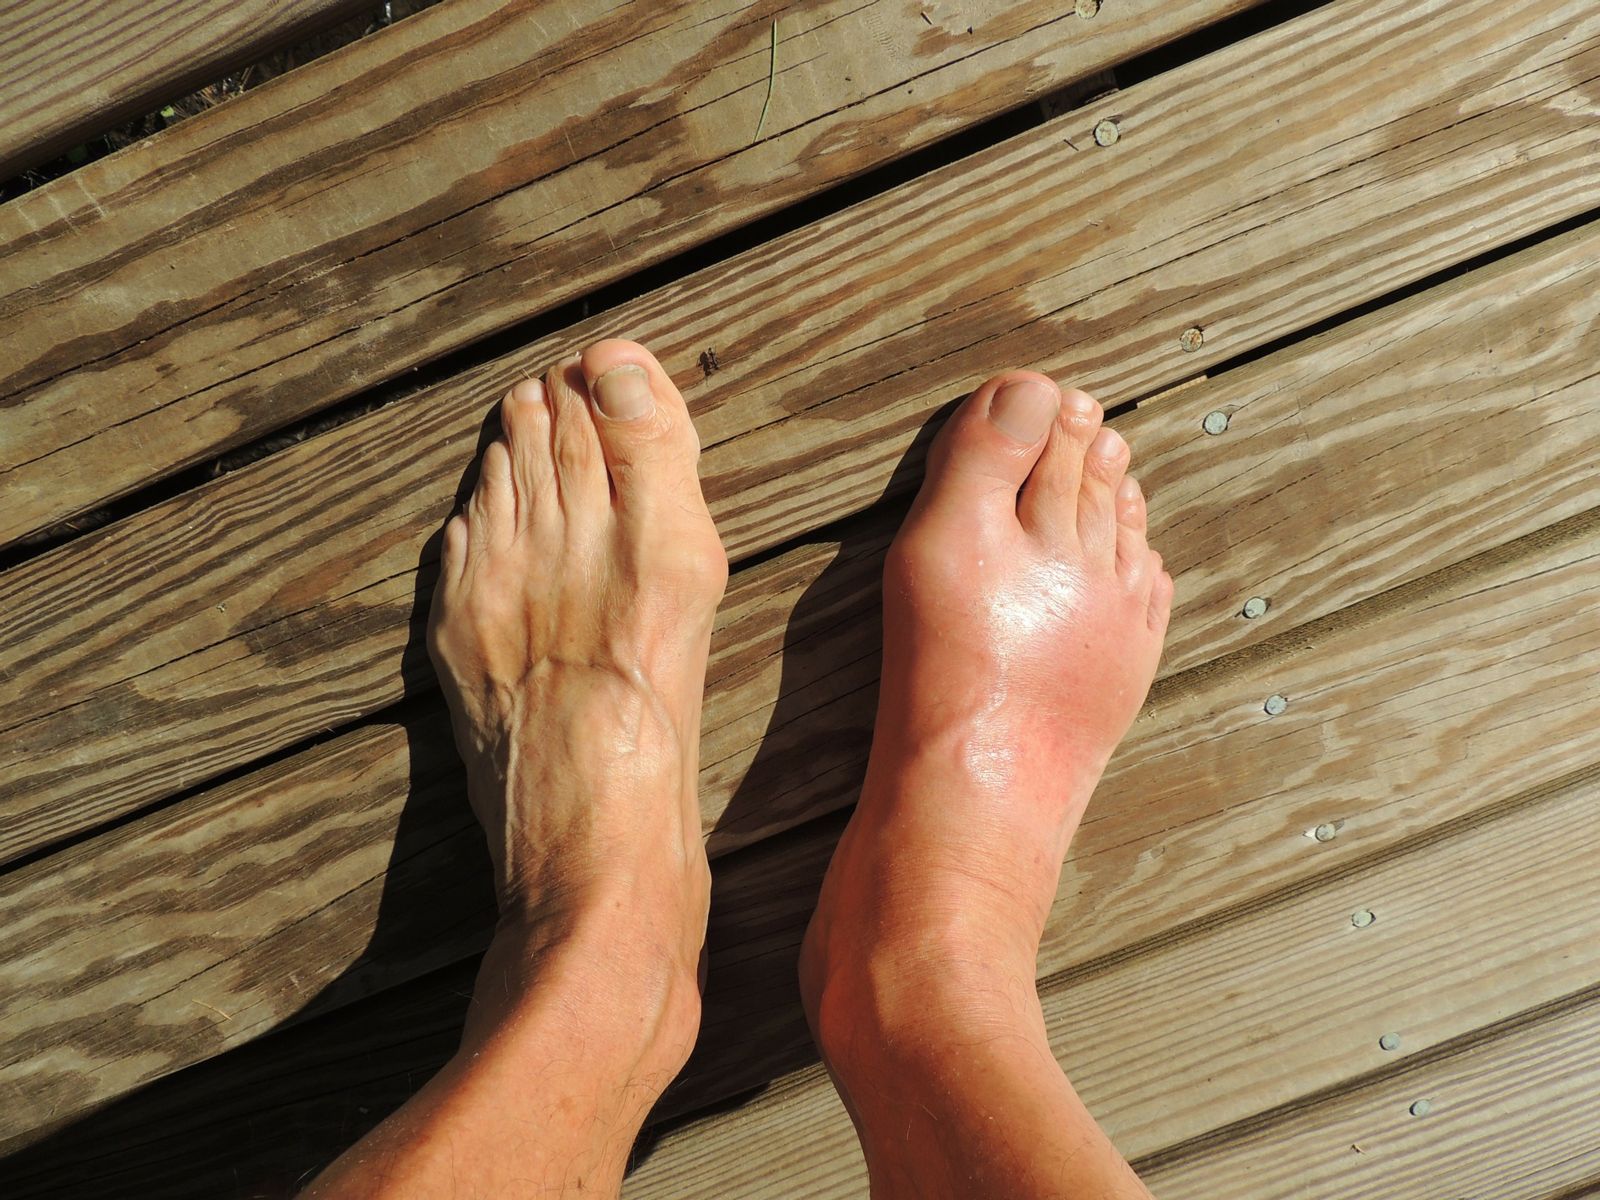 What symptoms indicate gout in the ankle?